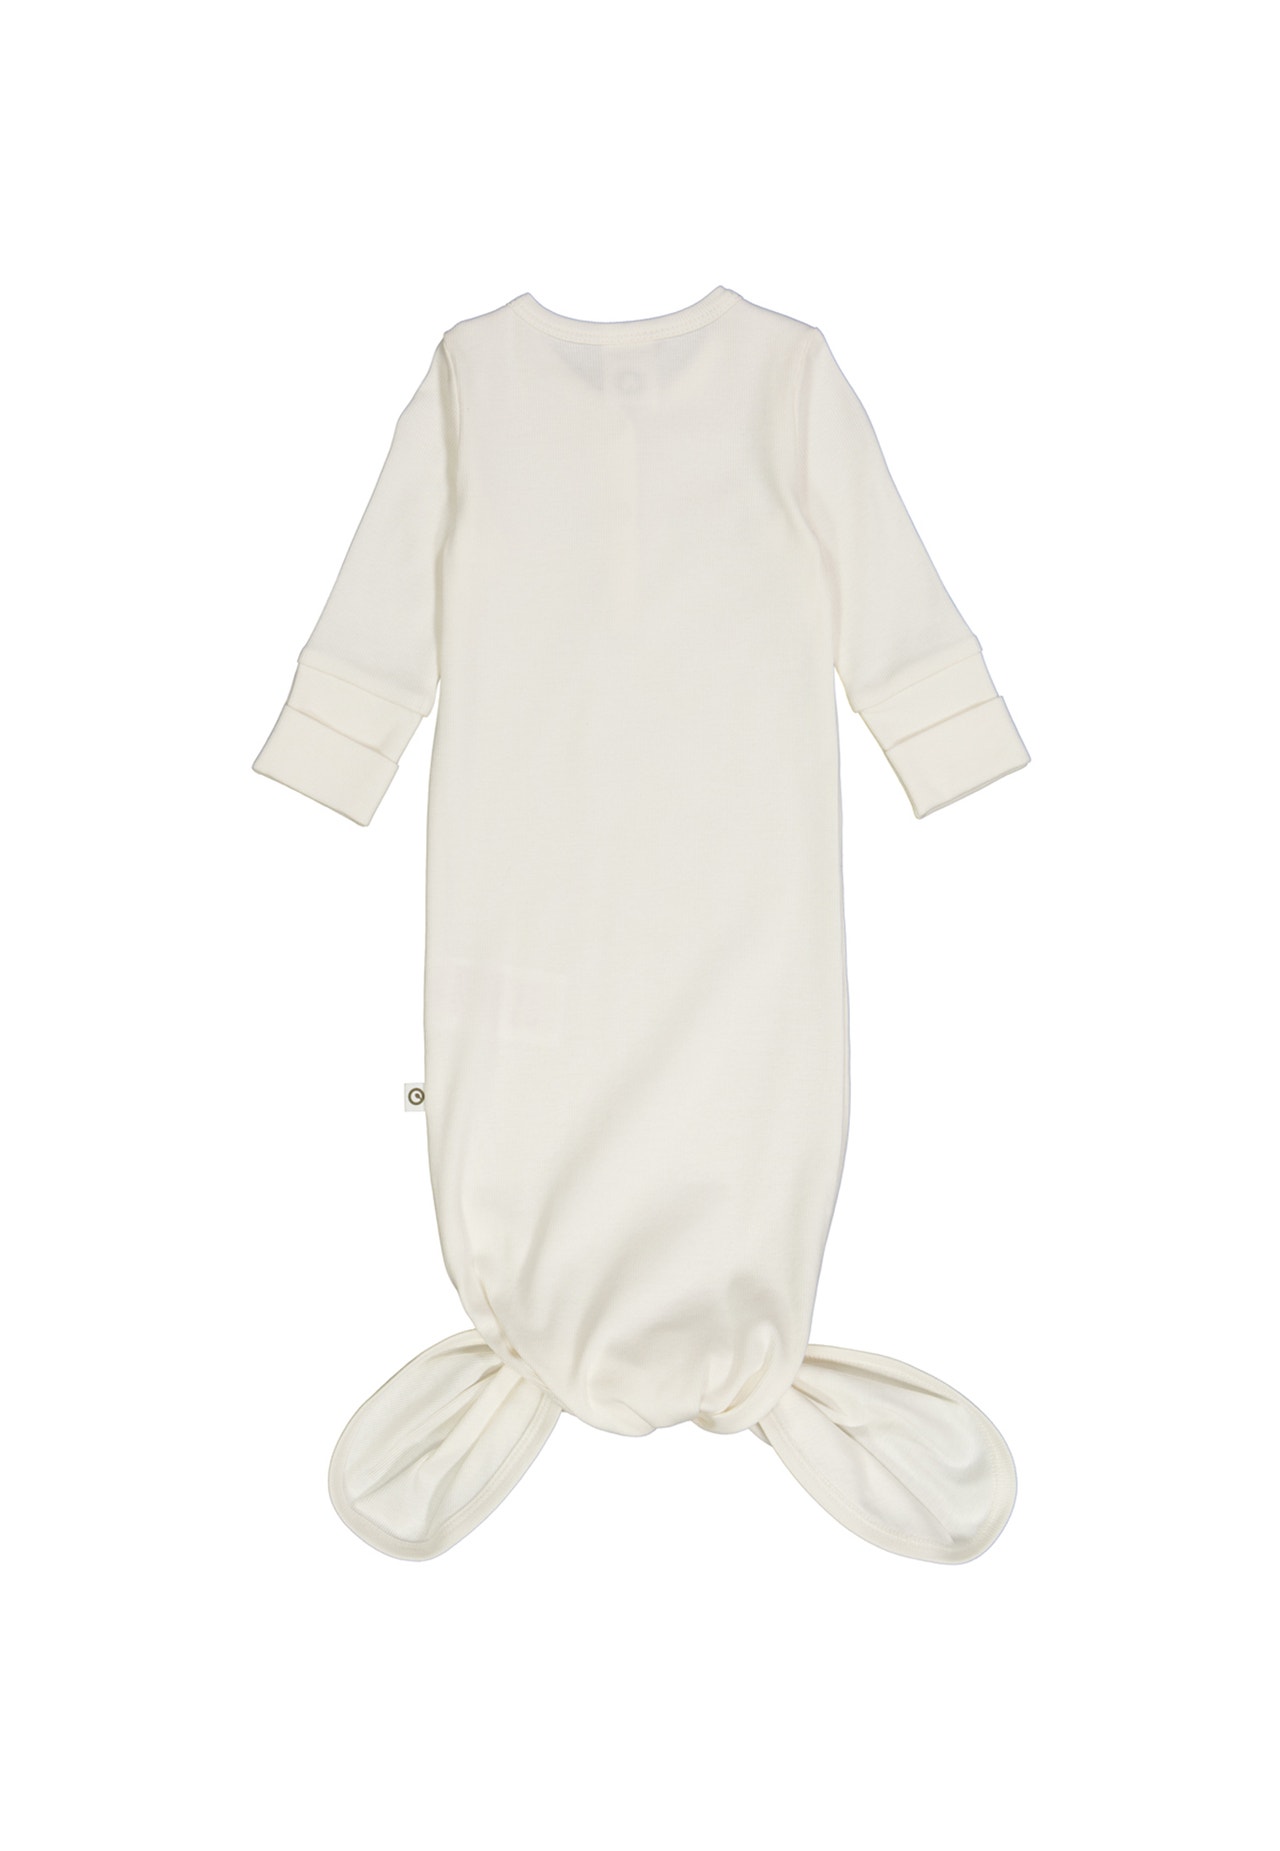 MAMA.LICIOUS Baby-gown -Balsam Cream - 1584061500